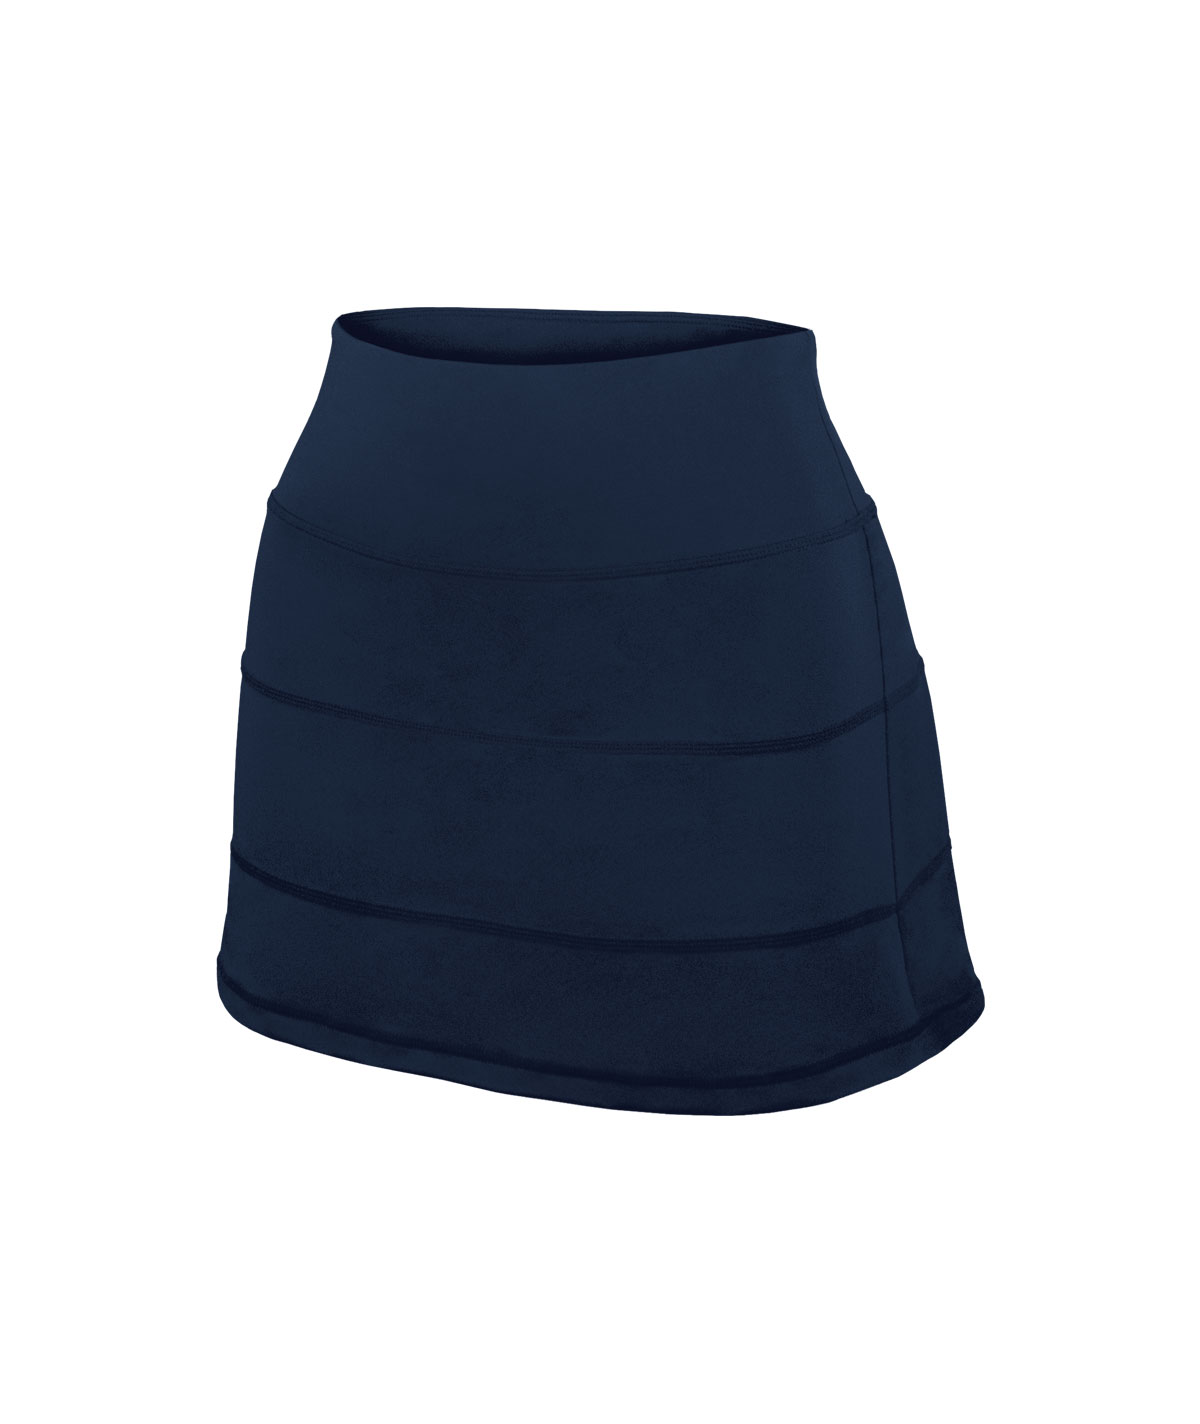 GK Pleated Athletic Skirt With Built-In Short